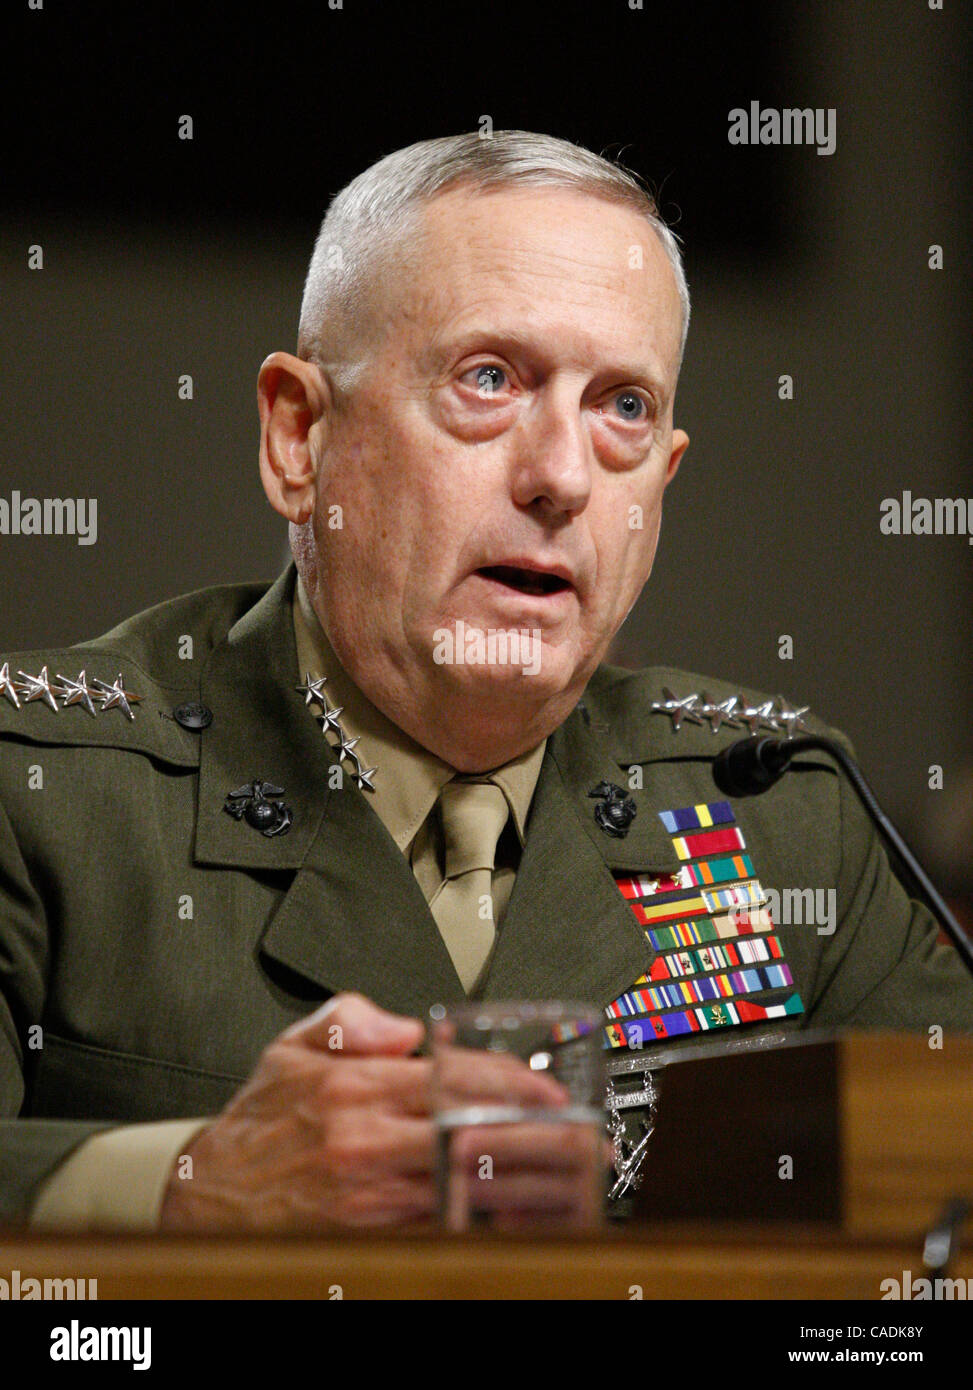 Jul 27, 2010 - Washington, District of Columbia, U.S. - Marine Corps Gen. JAMES MATTIS testifies before the Senate Armed Services committee for reappointment to the grade of general and to be commander of the United States Central Command on Capitol Hill.  (Credit Image: © Richard Clement/ZUMApress. Stock Photo